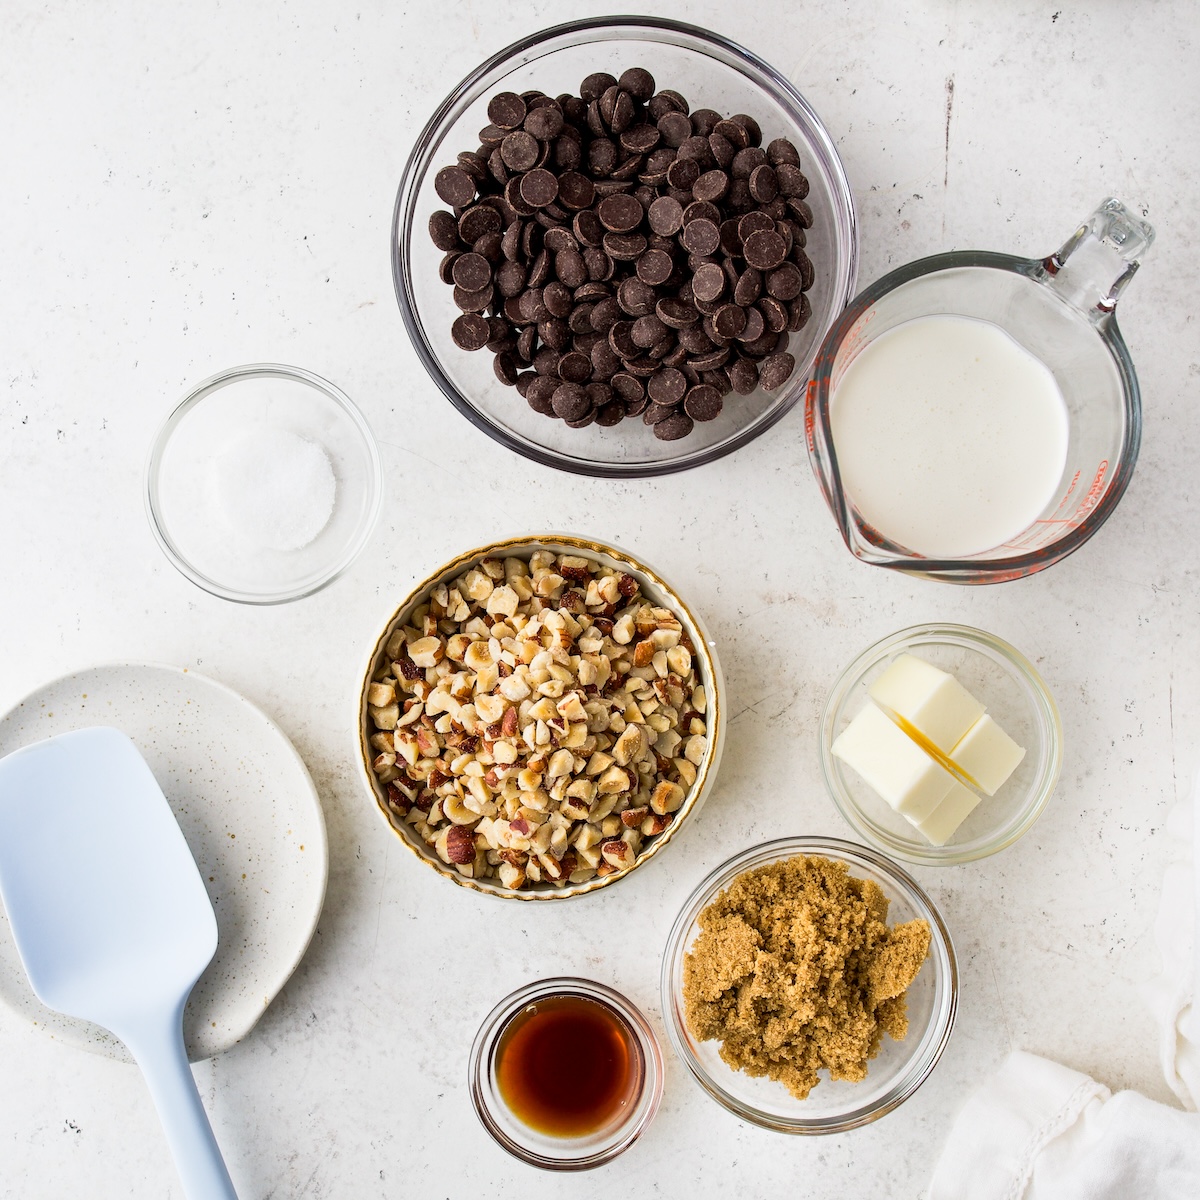 All of the ingredients needs to make homemade nutella on a white surface.